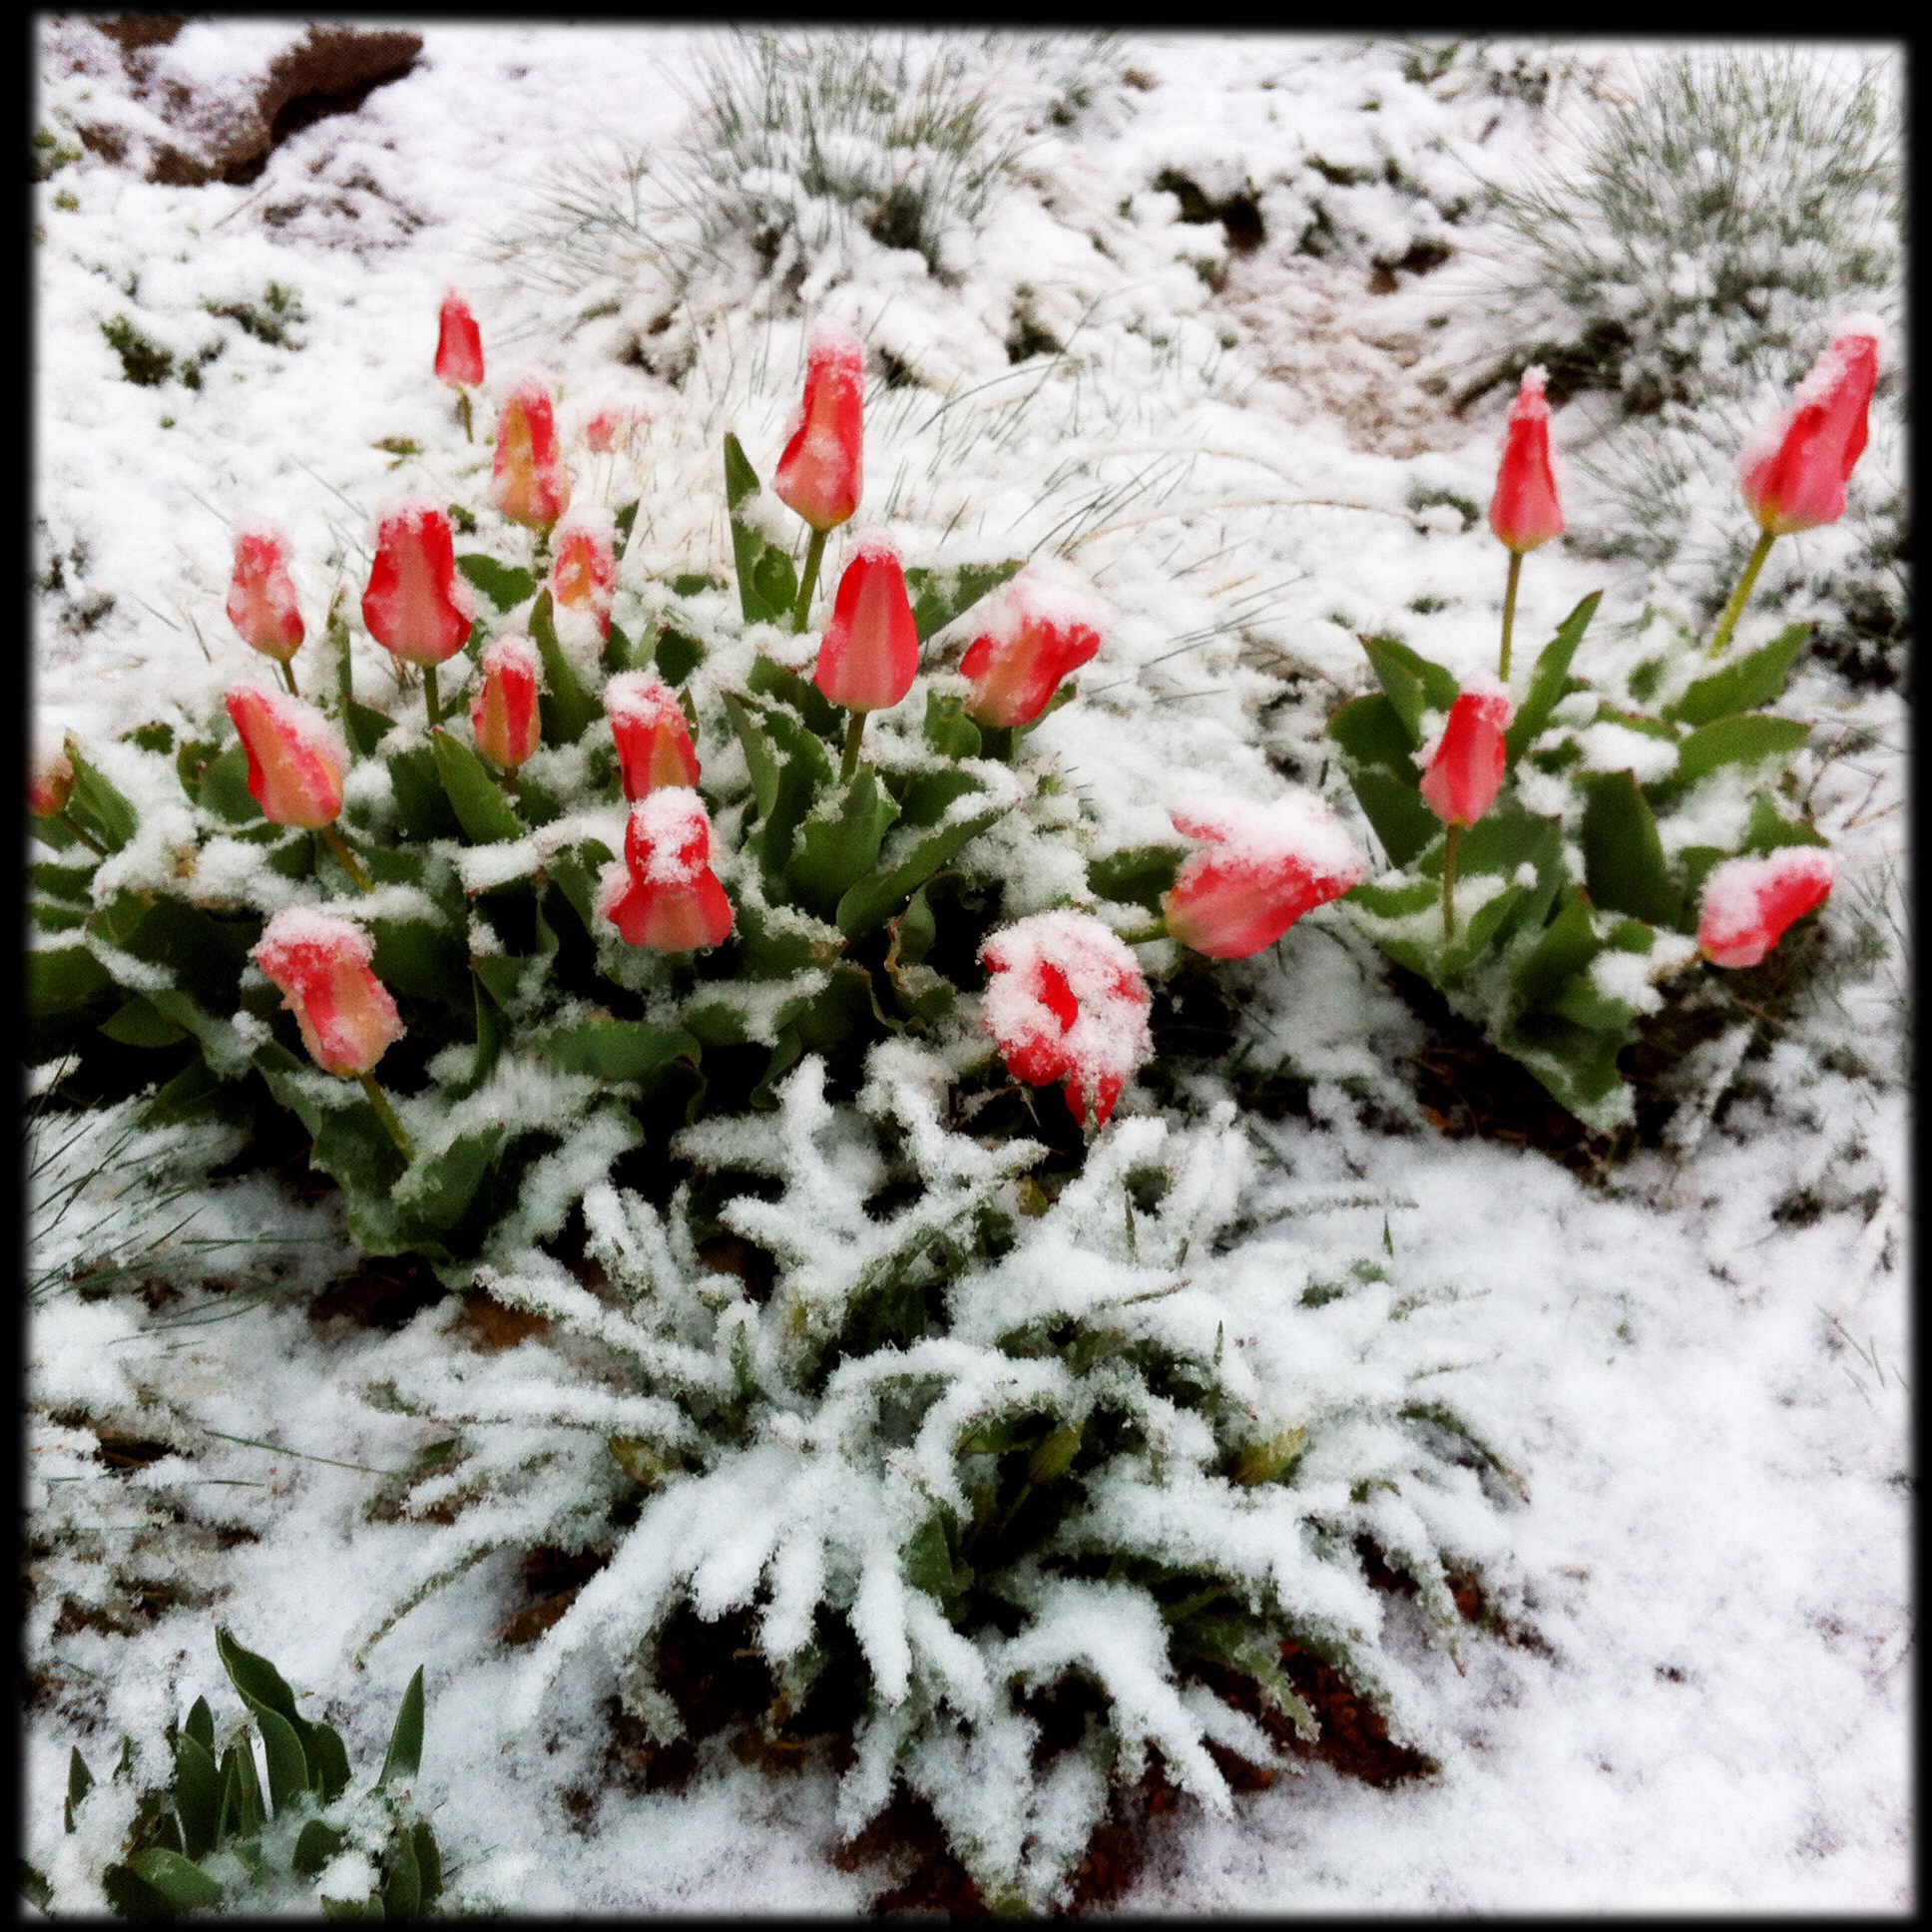 Tulips in snow, this fleeting bittersweet beauty. A friend in sunny Florida fights for her life.